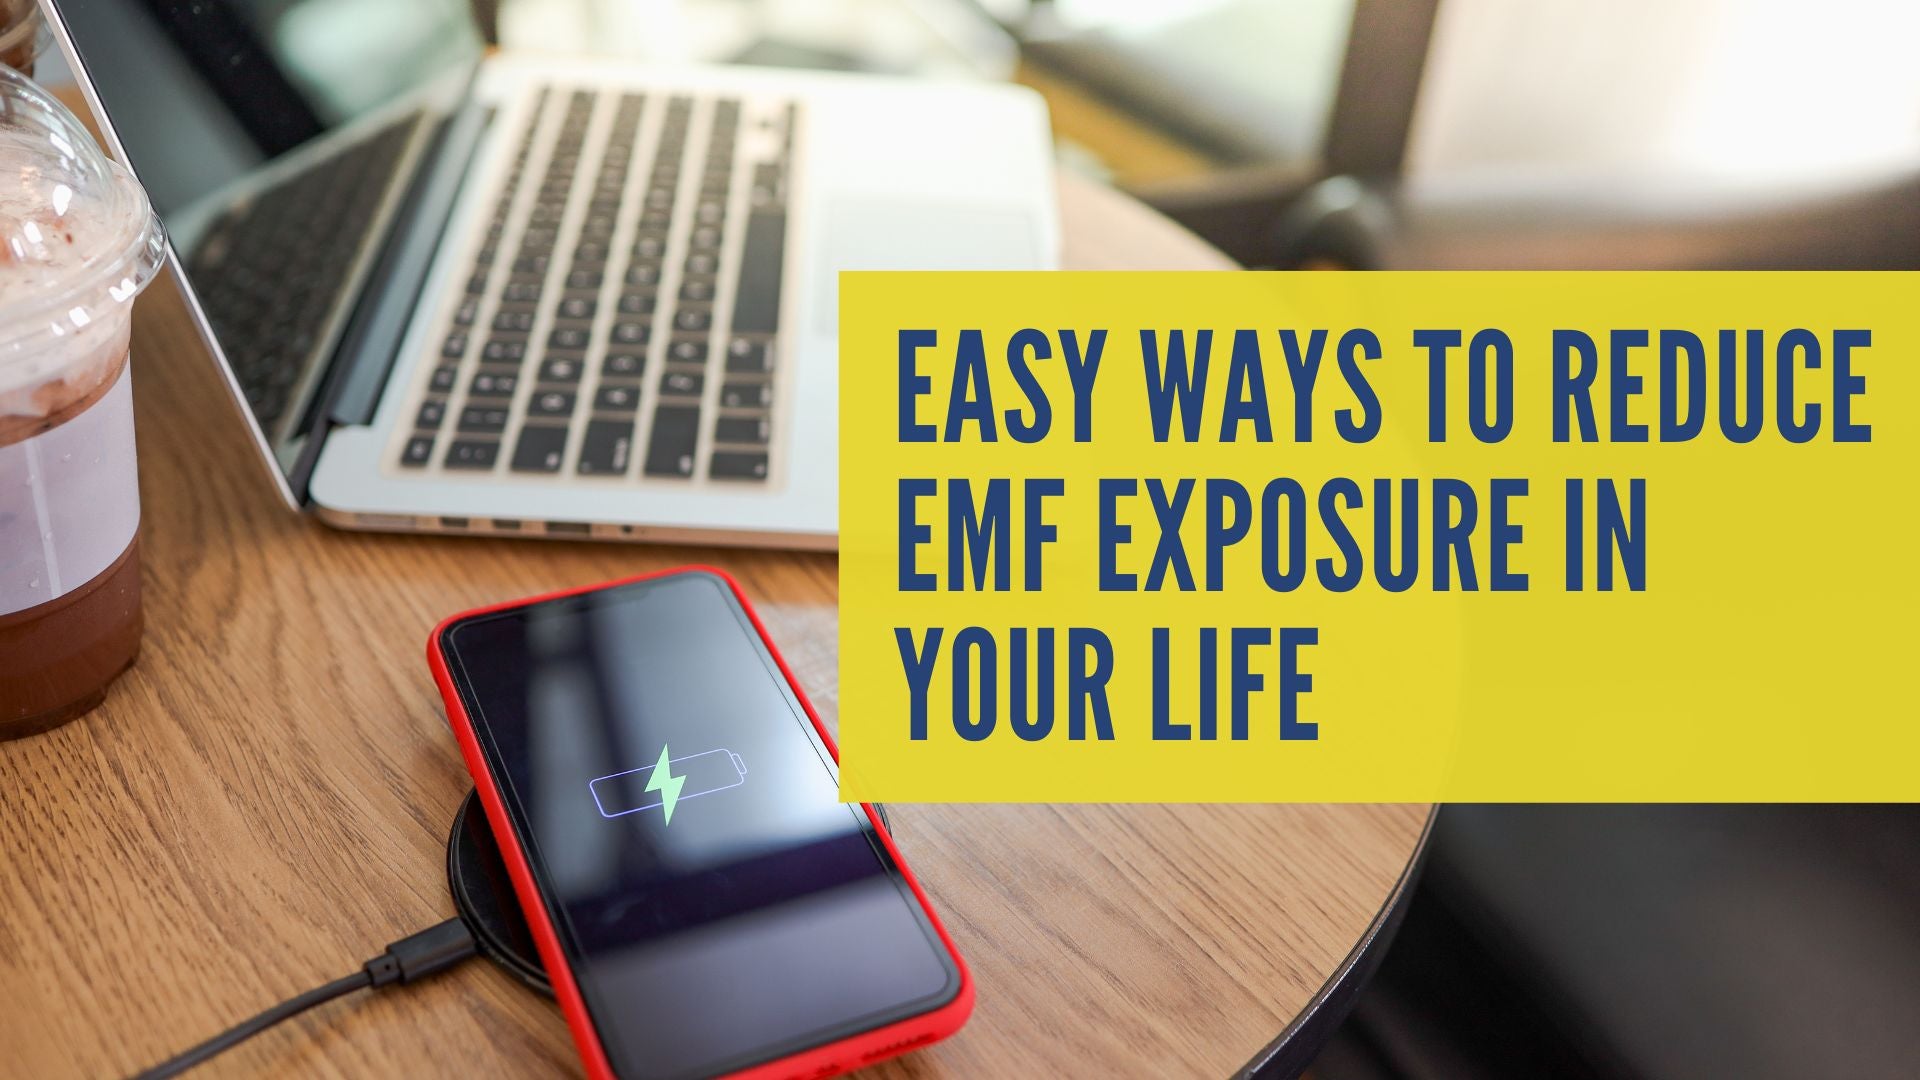 Easy Ways To Reduce EMF Exposure In Your Life